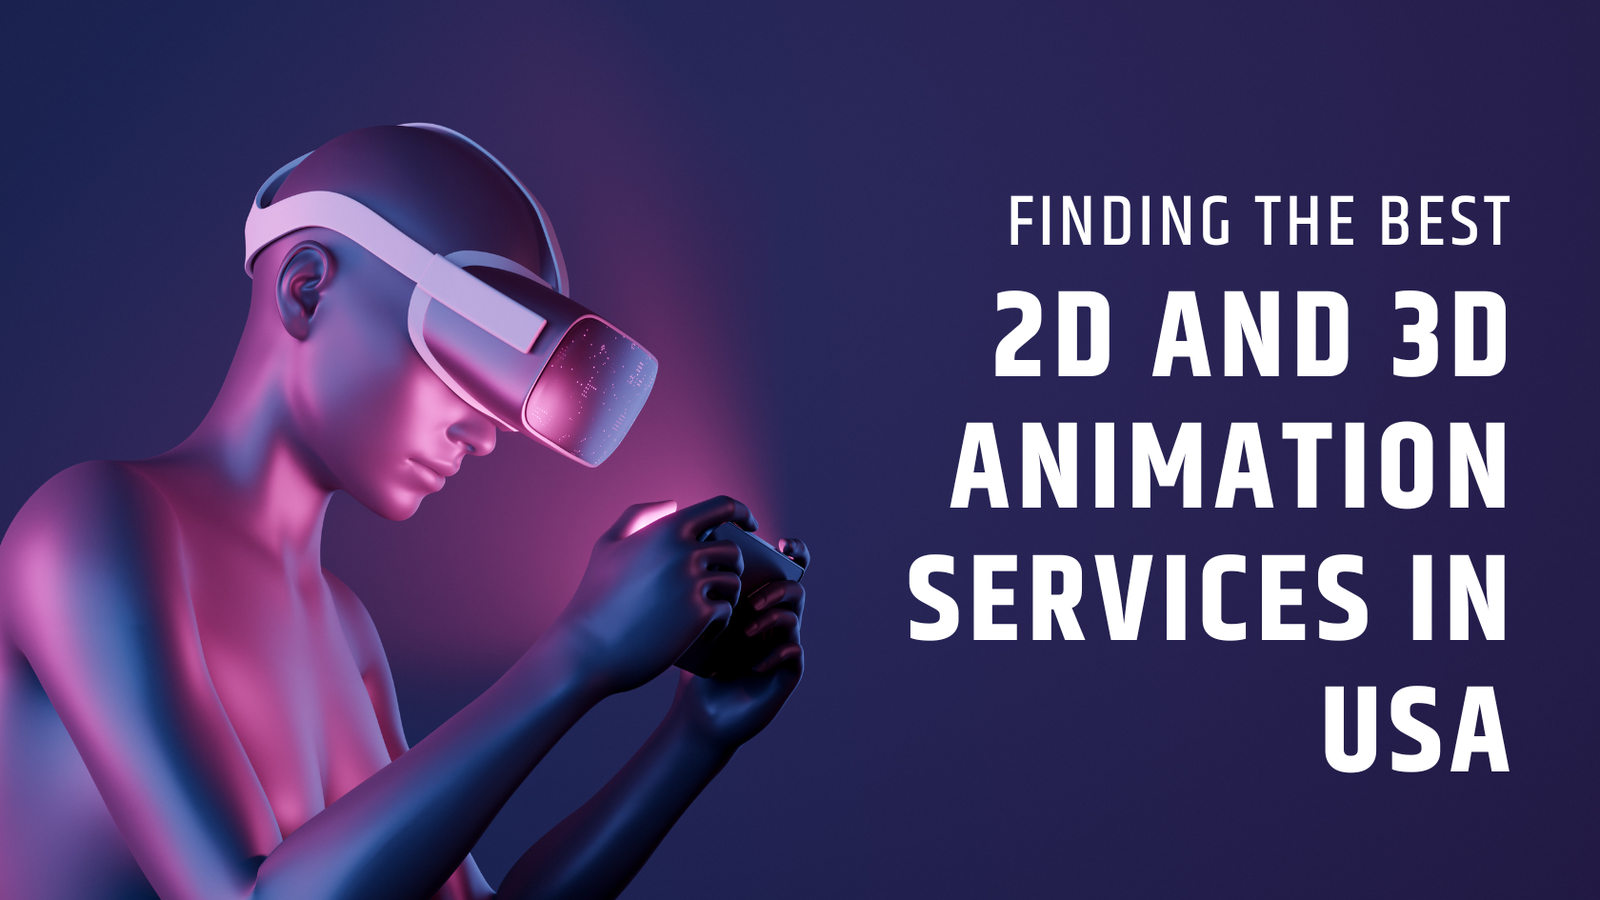 Finding the Best 2D and 3D Animation Services in USA